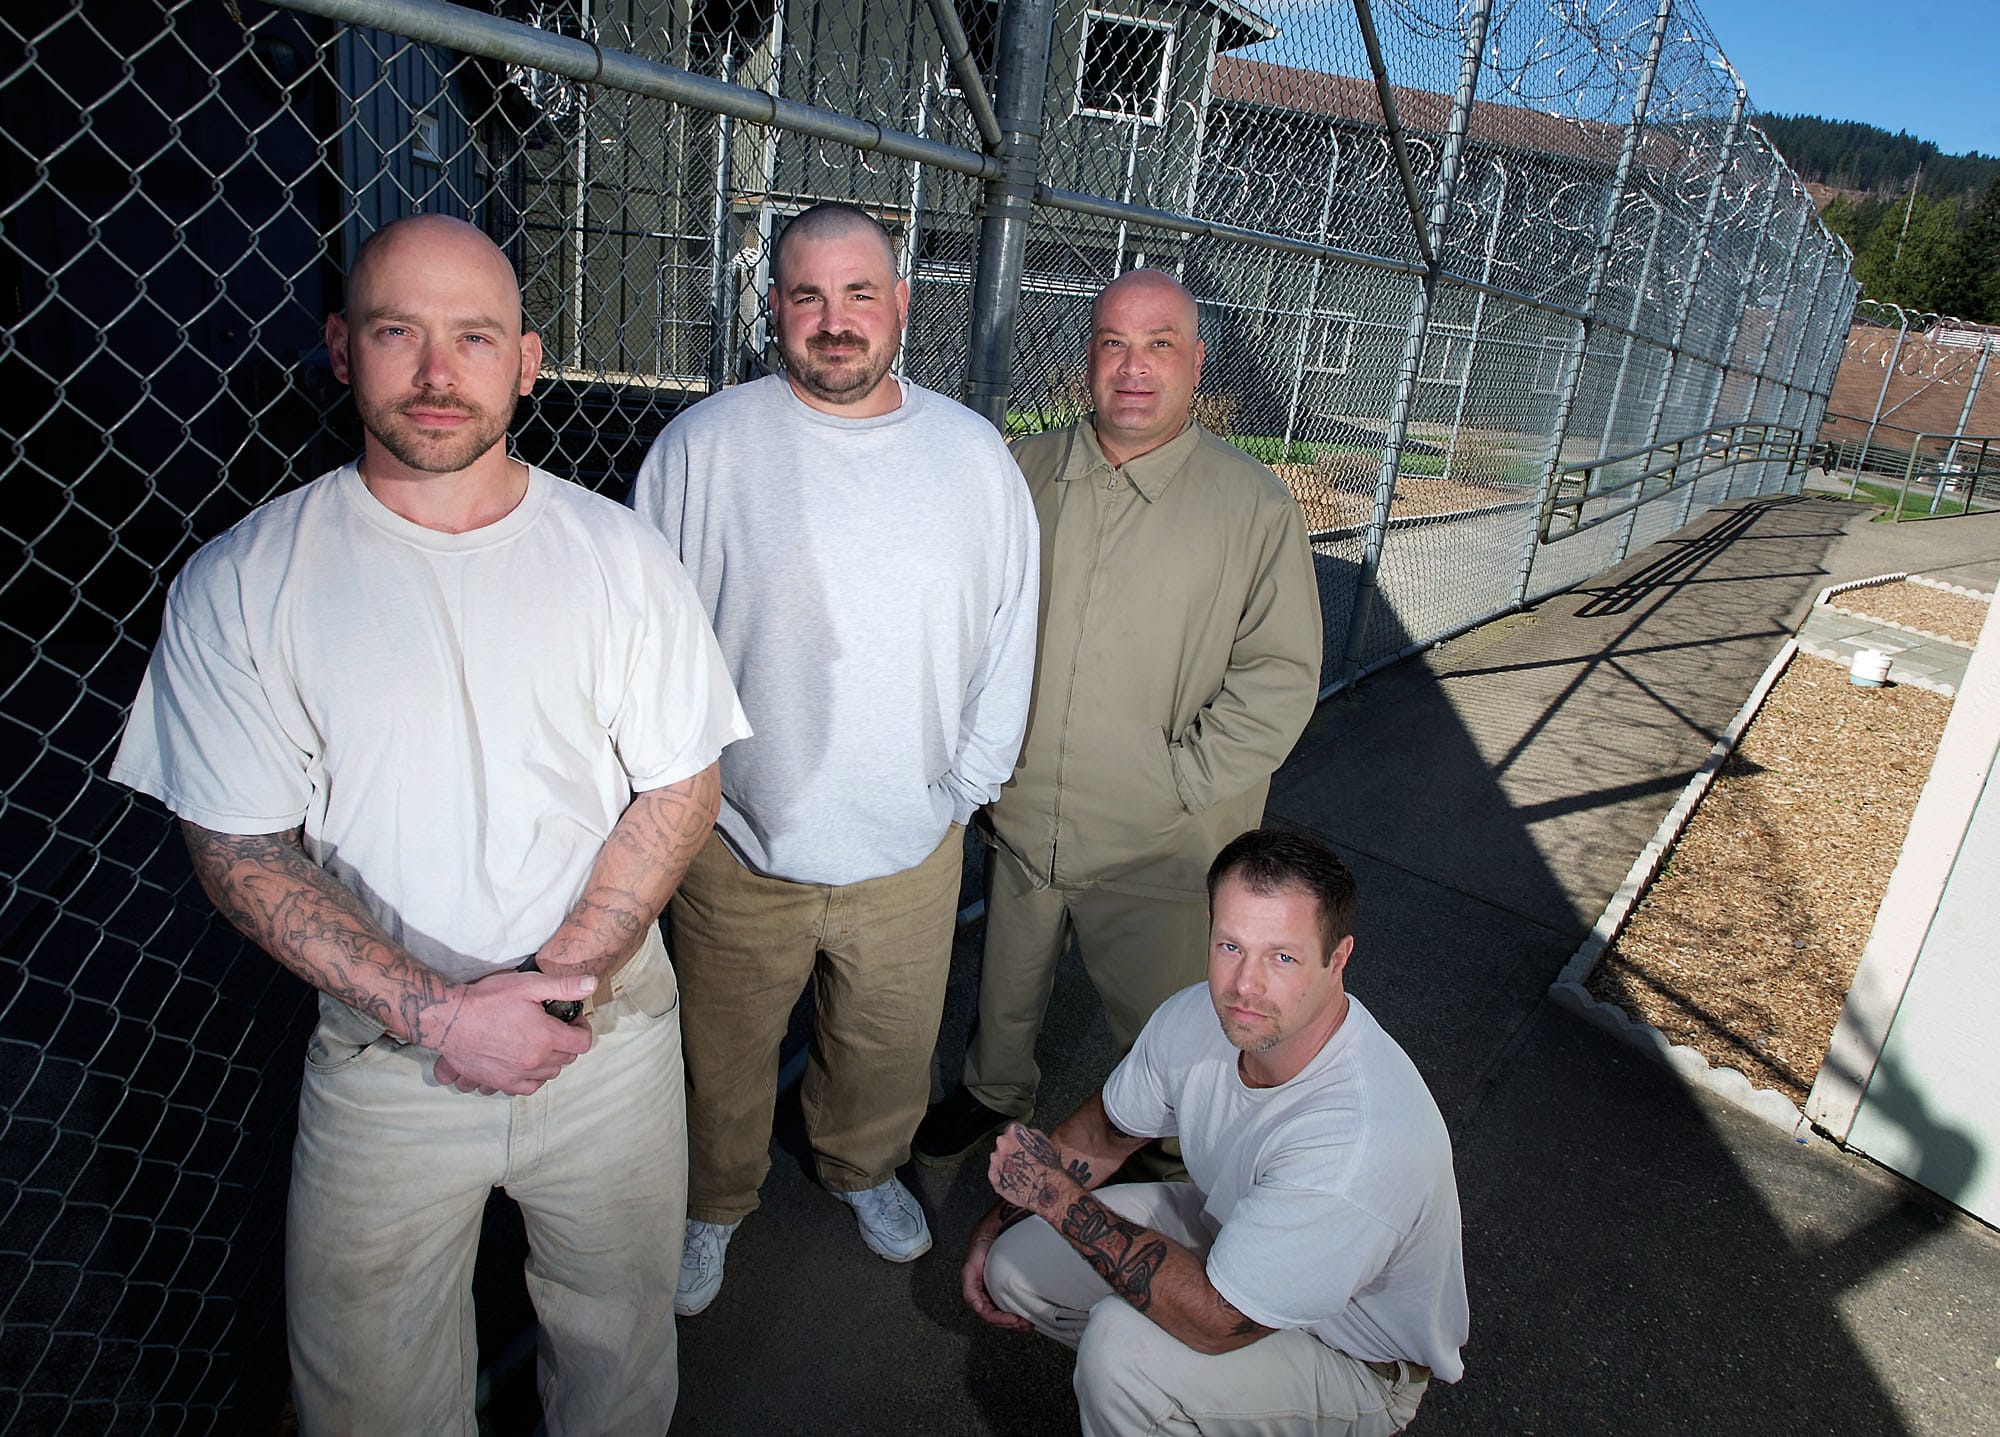 Larch Corrections Center offenders Michael Skinner, from left, Clayton Chapin, Walt Beasley, and Marcus Smith gather Friday to discuss their roles as part of a 17-man crew that helped feed rescue and recovery workers for two weeks at the scene of the massive March 22 landslide near Oso.